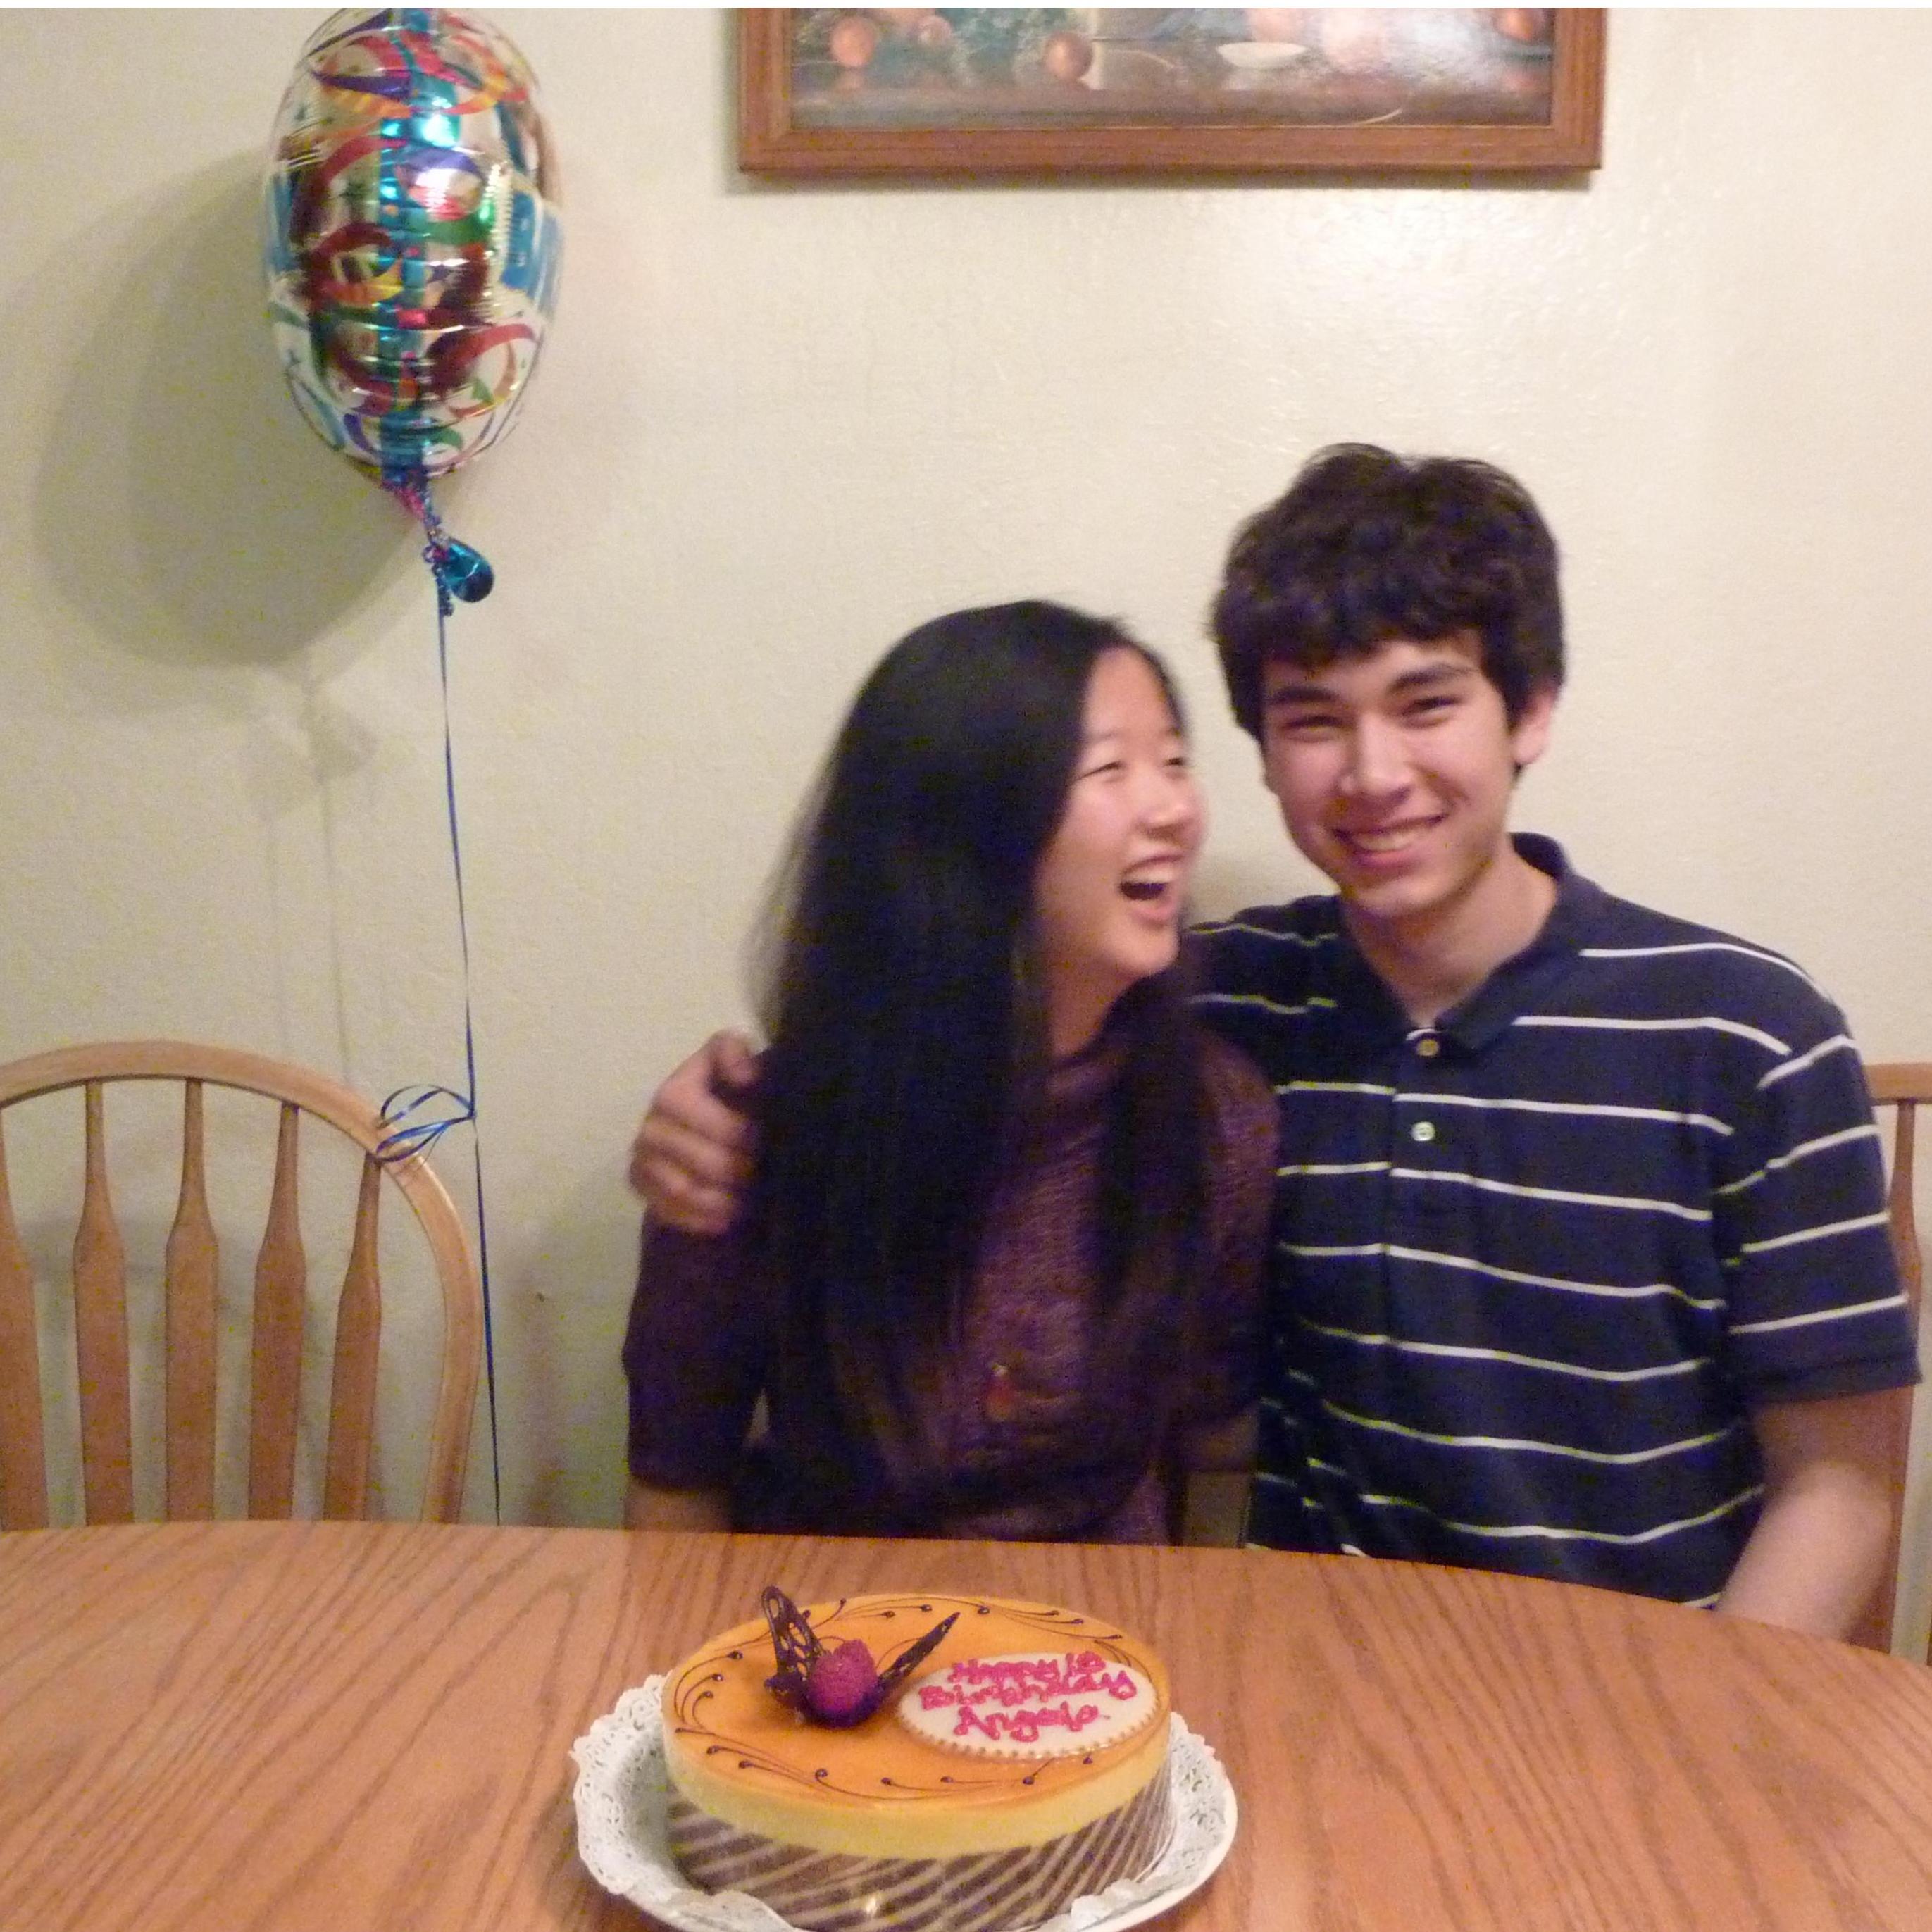 One of the first birthdays we celebrated together (December 2012)